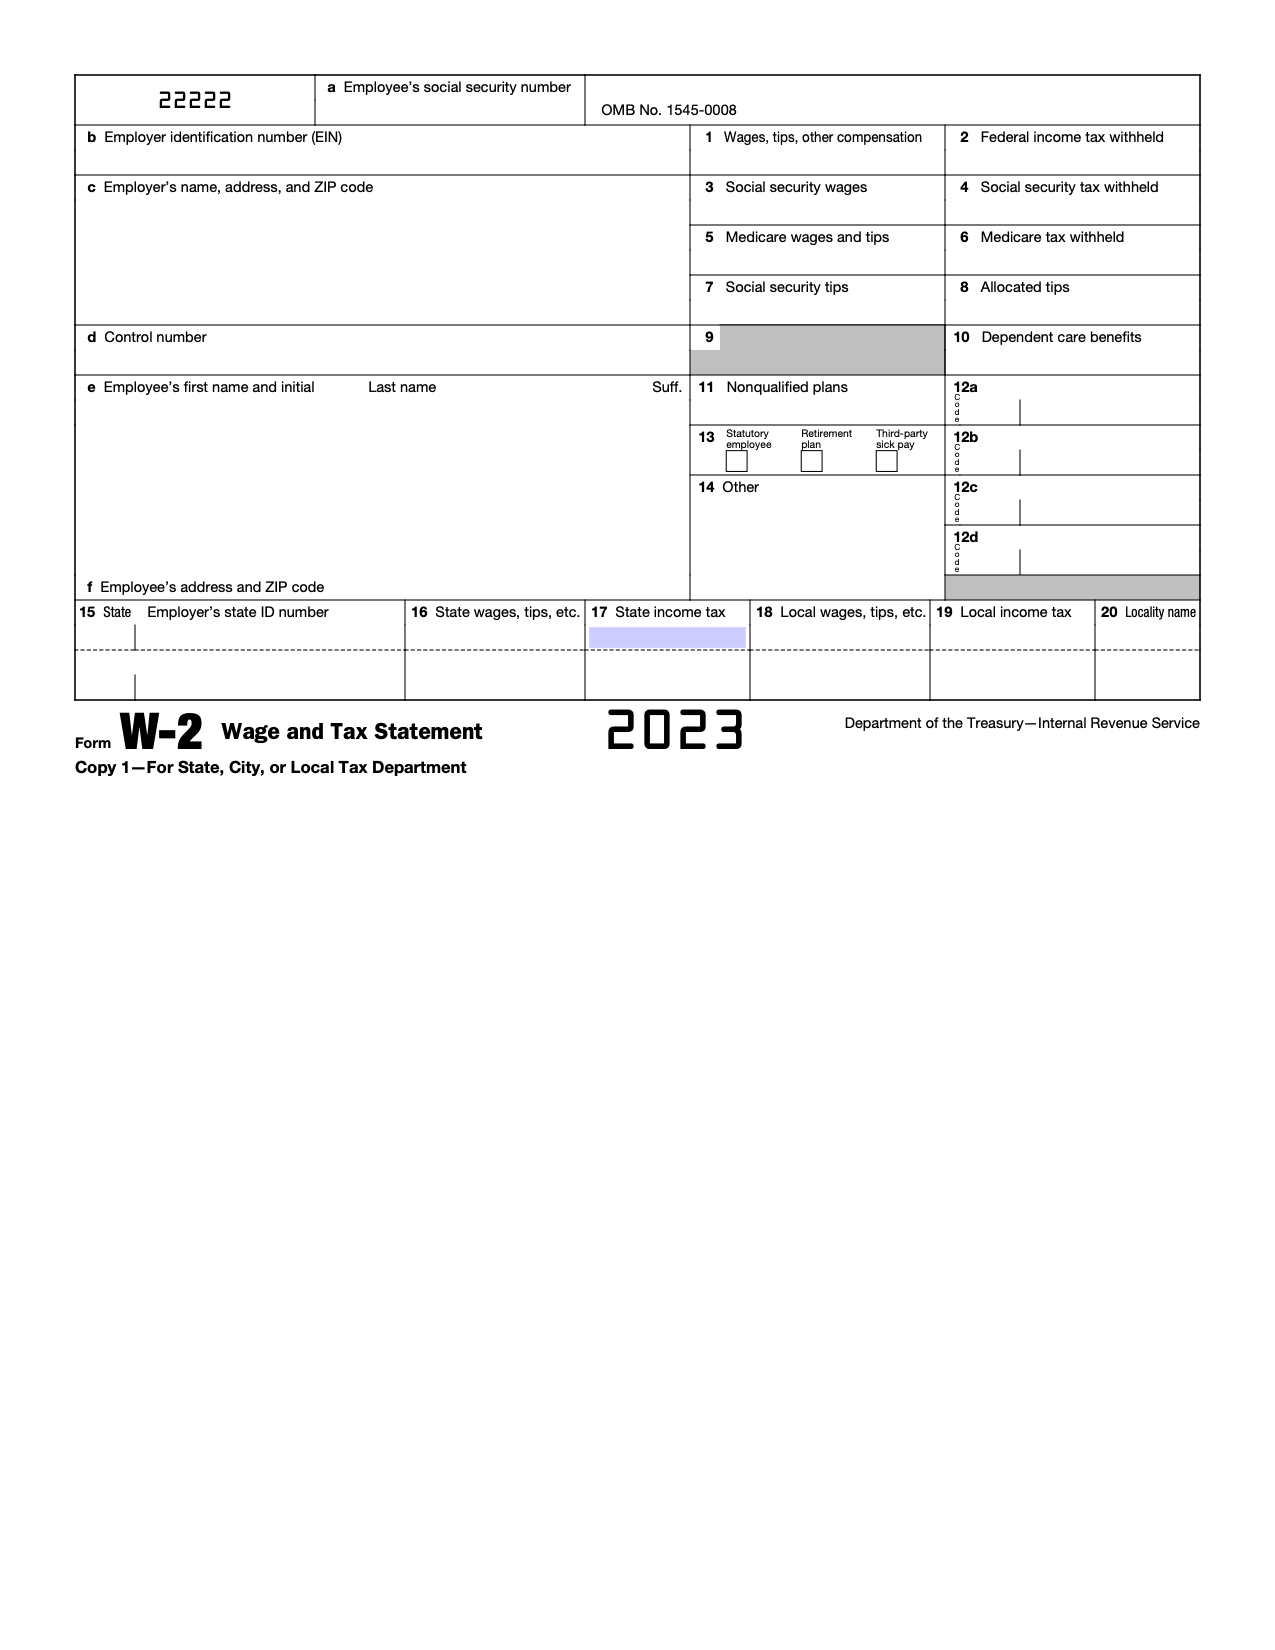 Free Irs Form W-2 | Wage And Tax Statement - Pdf – Eforms intended for Make W2 Form Free